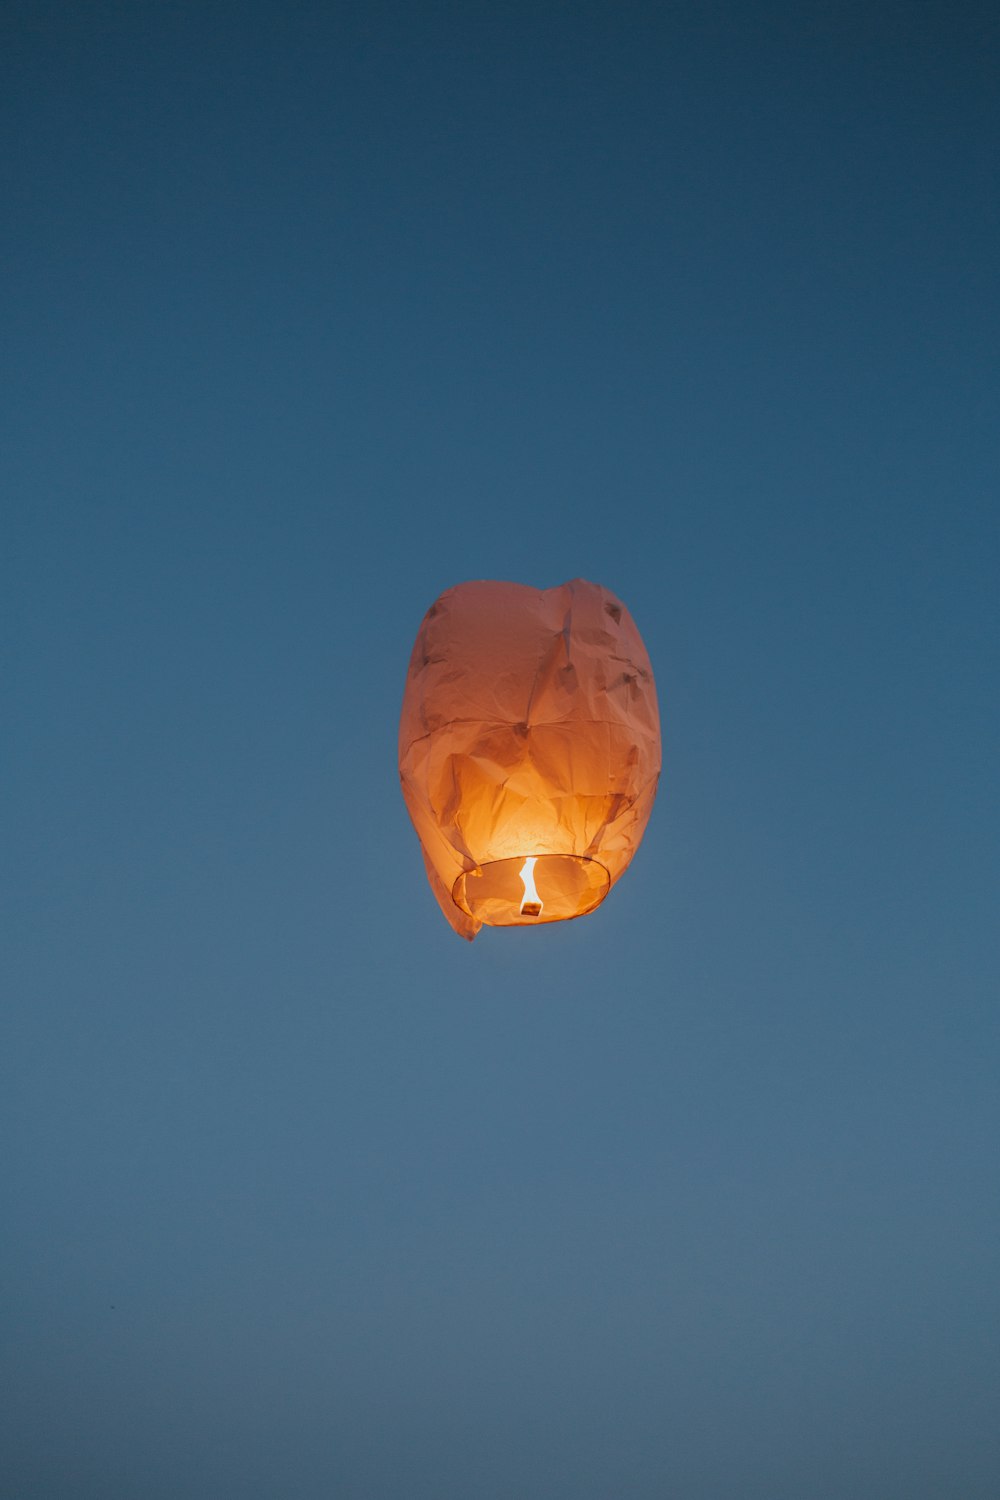 a sky lantern in the shape of a pig